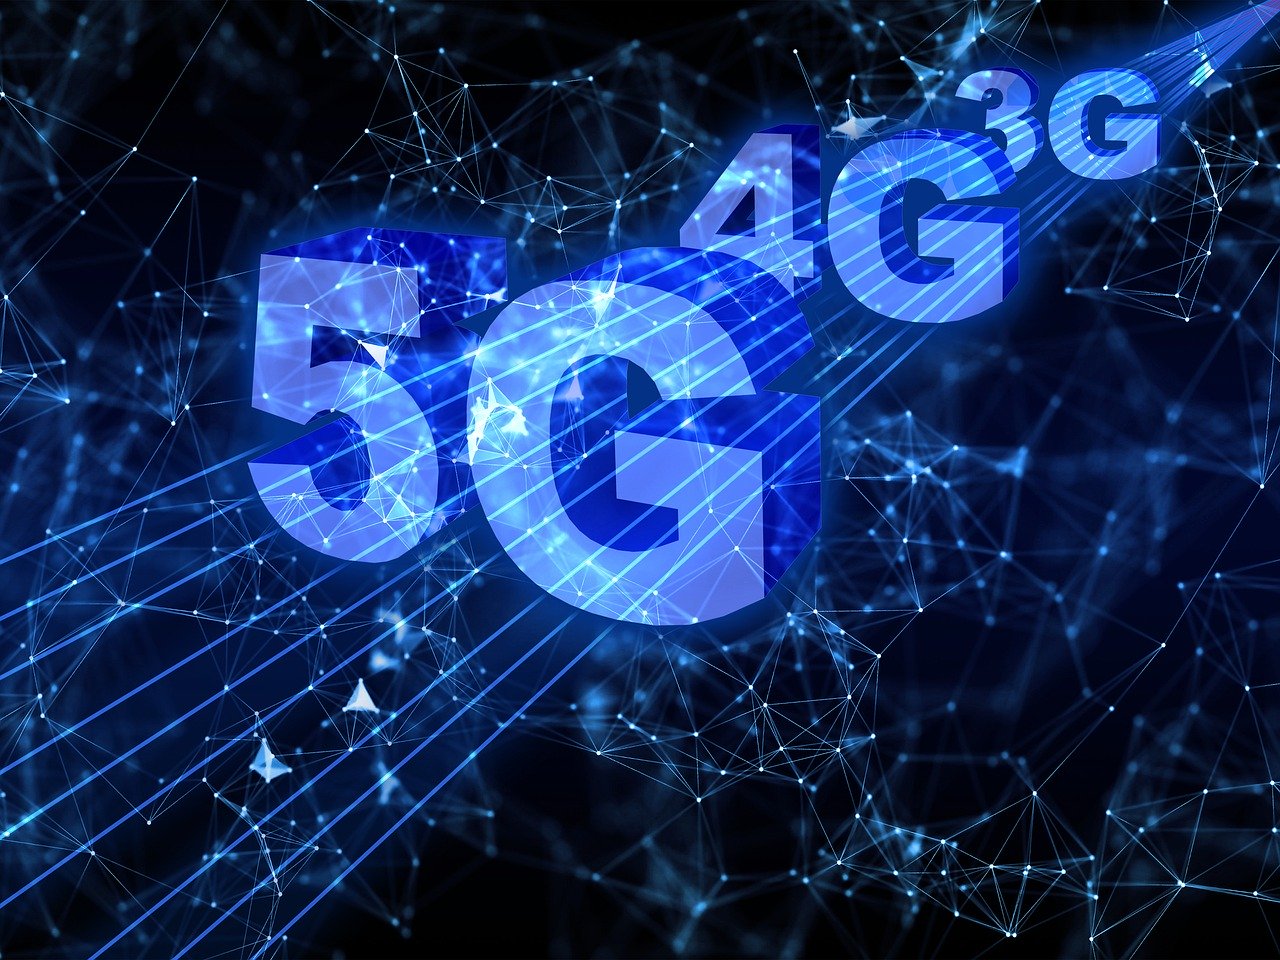 5G mobile network